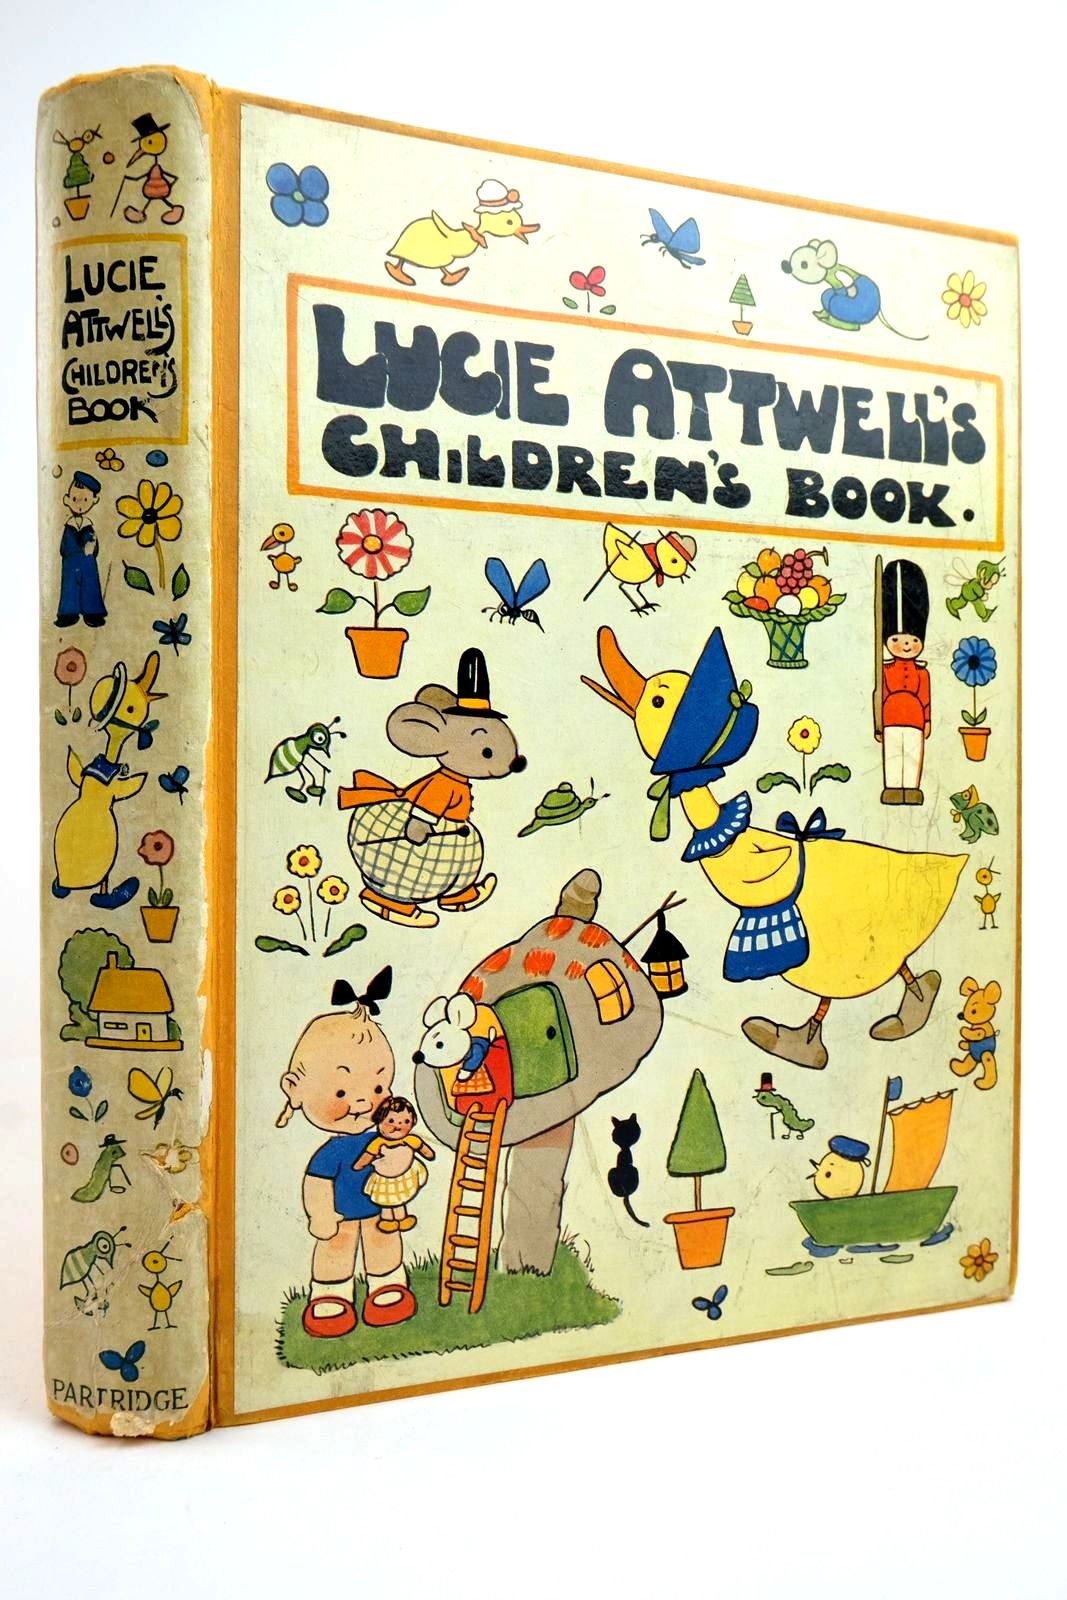 Photo of LUCIE ATTWELL'S CHILDREN'S BOOK 1929 written by Attwell, Mabel Lucie illustrated by Attwell, Mabel Lucie published by S.W. Partridge & Co. Ltd. (STOCK CODE: 2135599)  for sale by Stella & Rose's Books